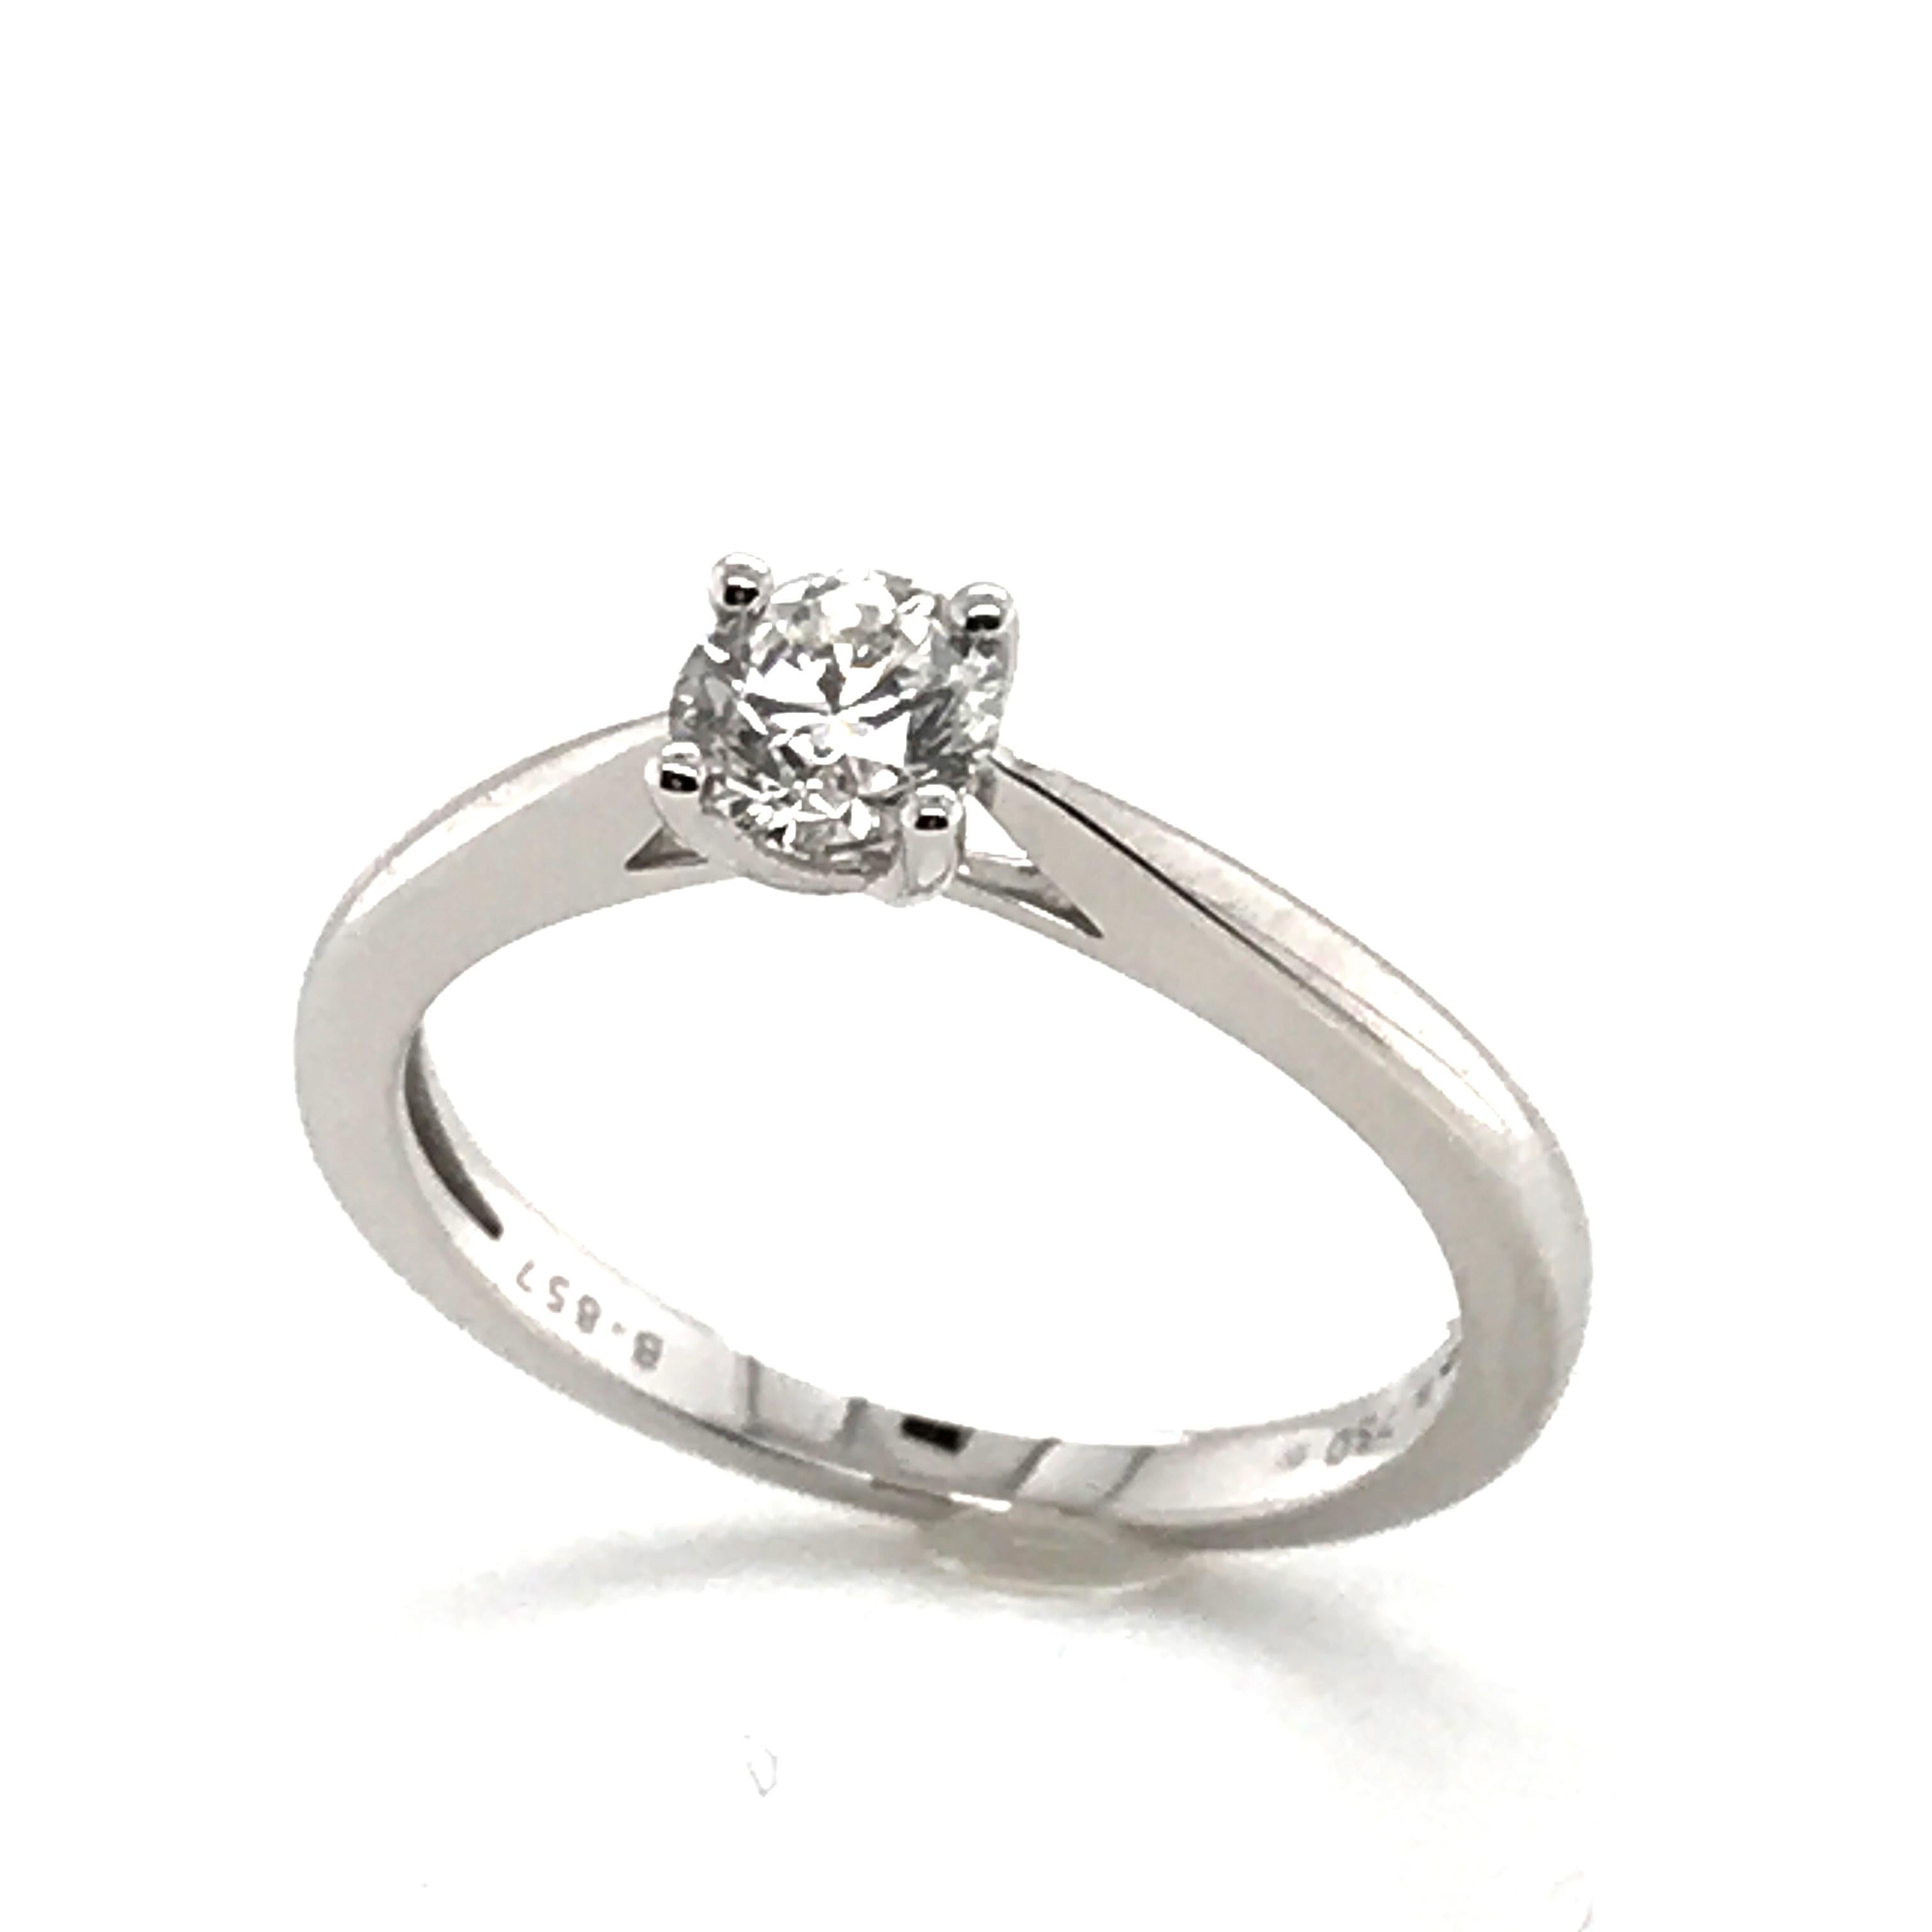 Solitaire ring in certified white F colour diamond with SI clarity. Carefully crafted, this ring embodies the perfect marriage between the natural beauty of diamonds and the finesse of goldsmithing.

The dazzlingly clear diamond is set in 18-carat